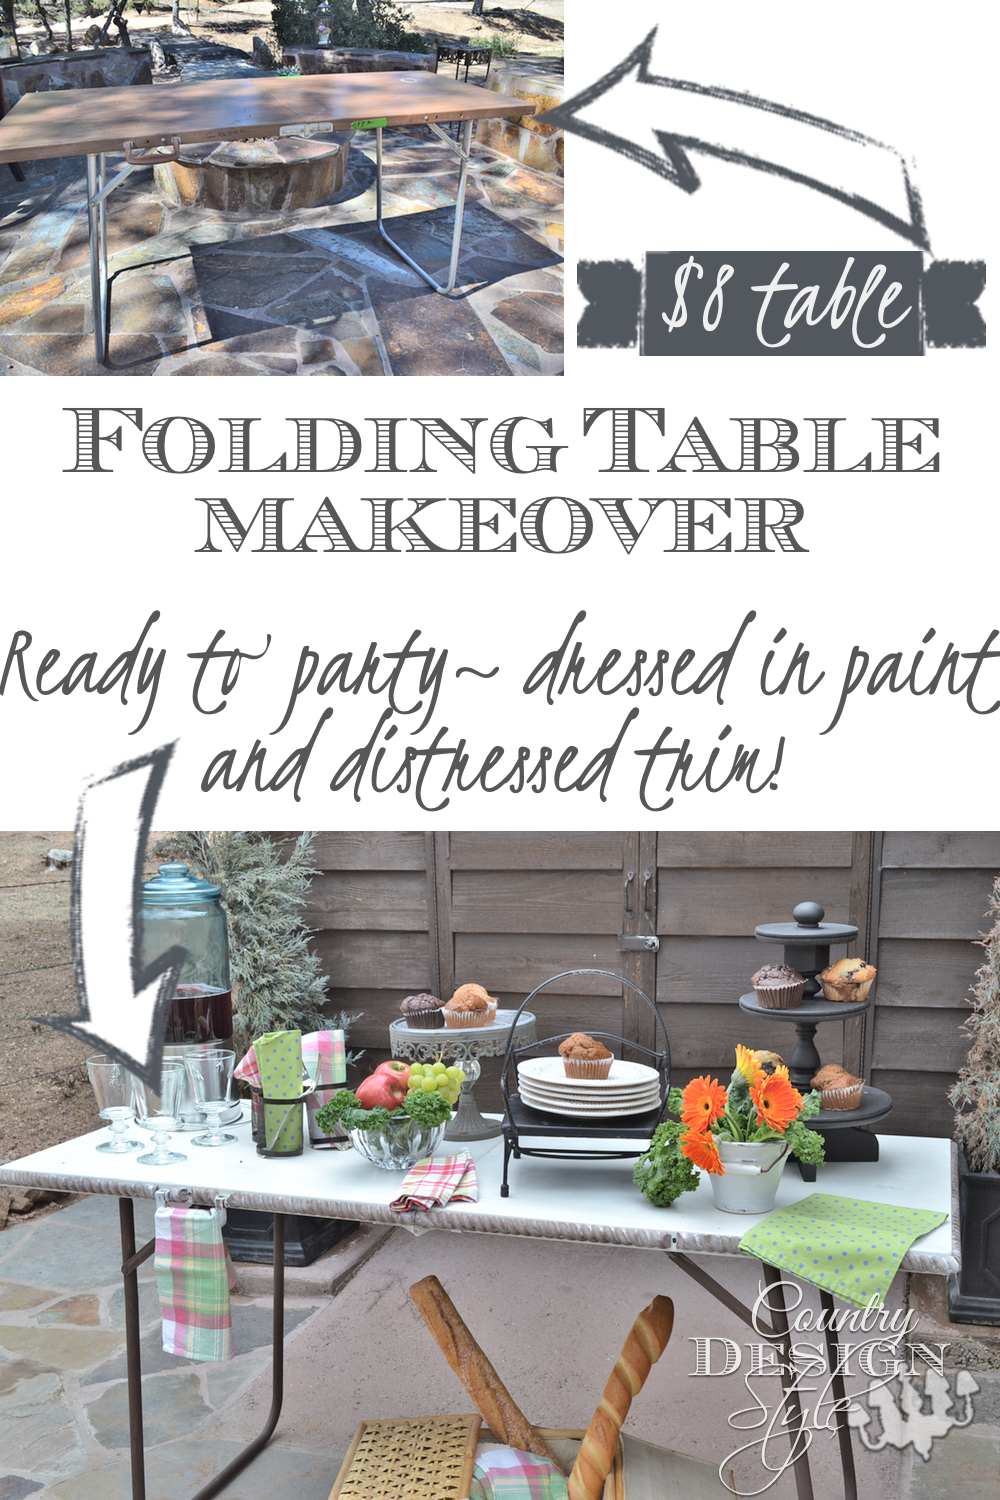 Folding table makeover, DIY painting with chalky paint added distress wood trim. Country Design Style